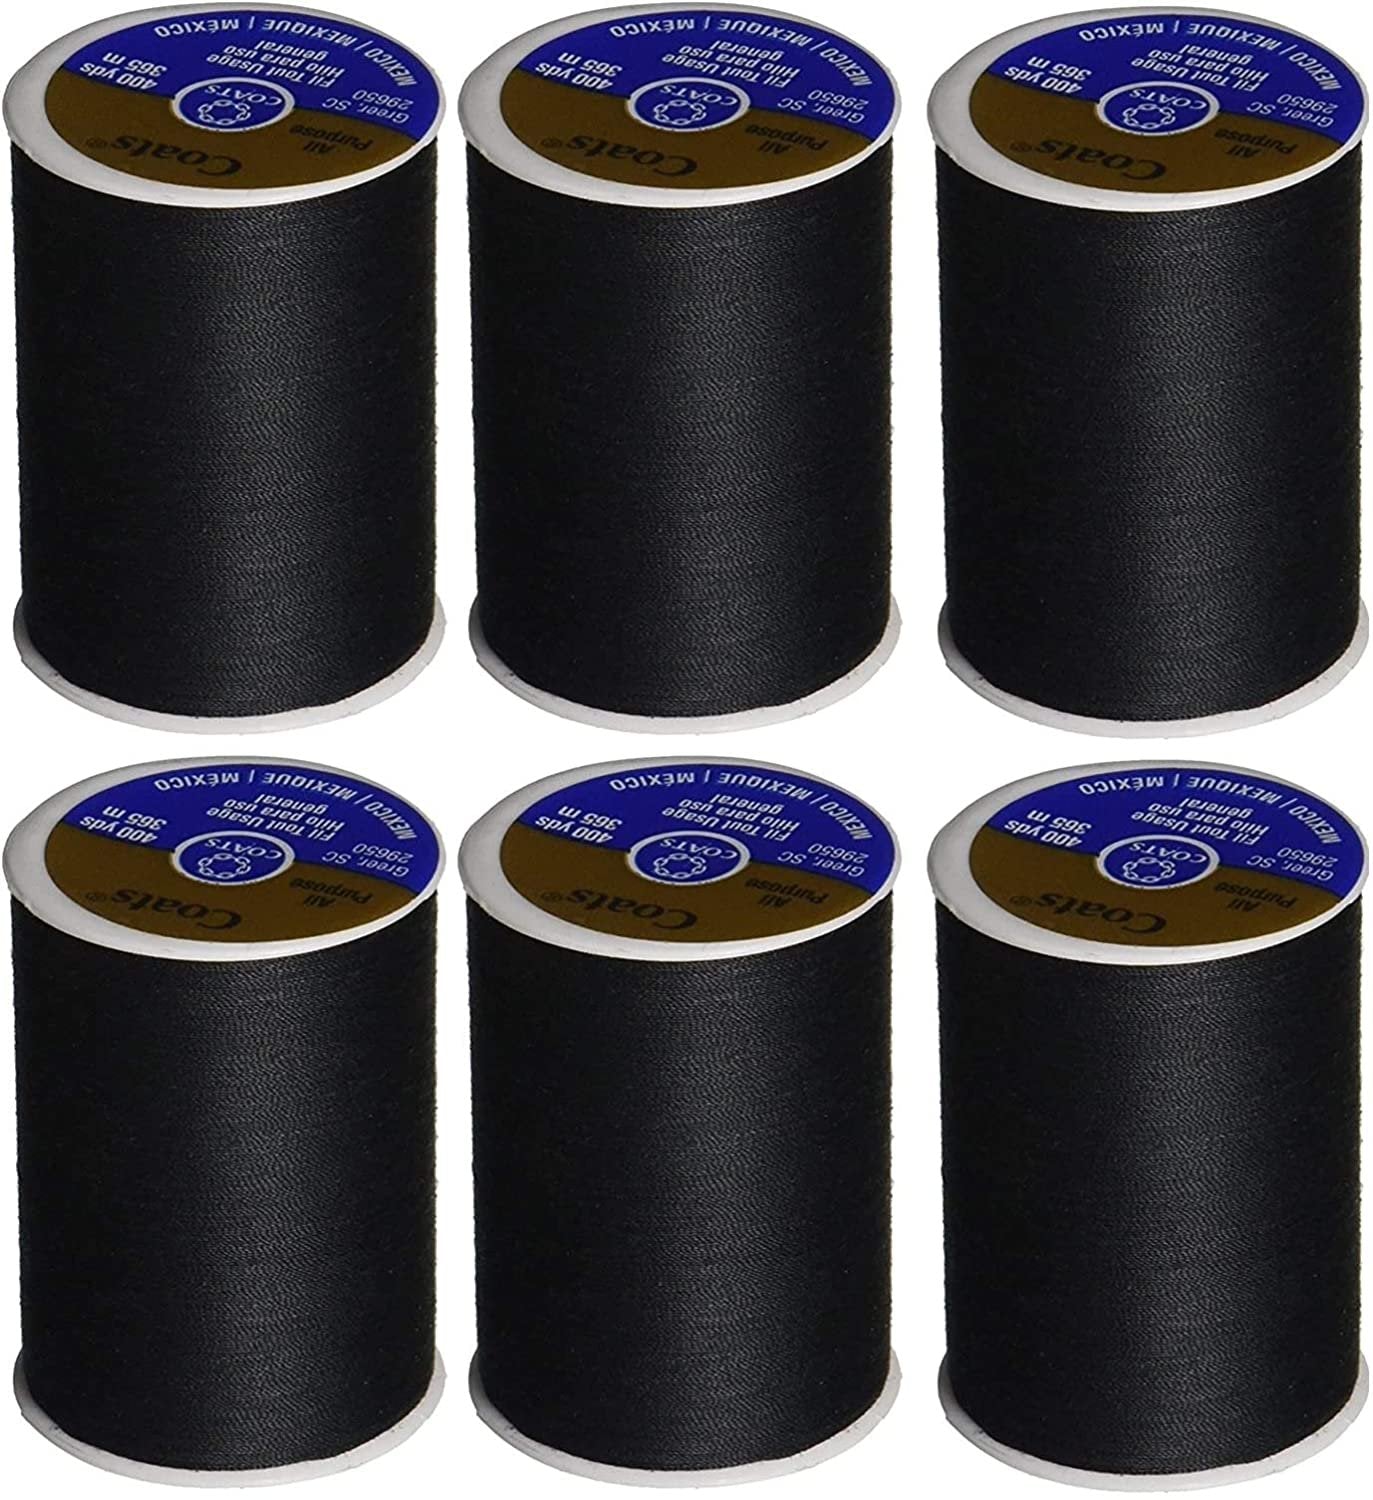 Coats Thread & Zippers and Transparent Polyester, 400 Yard, Clear